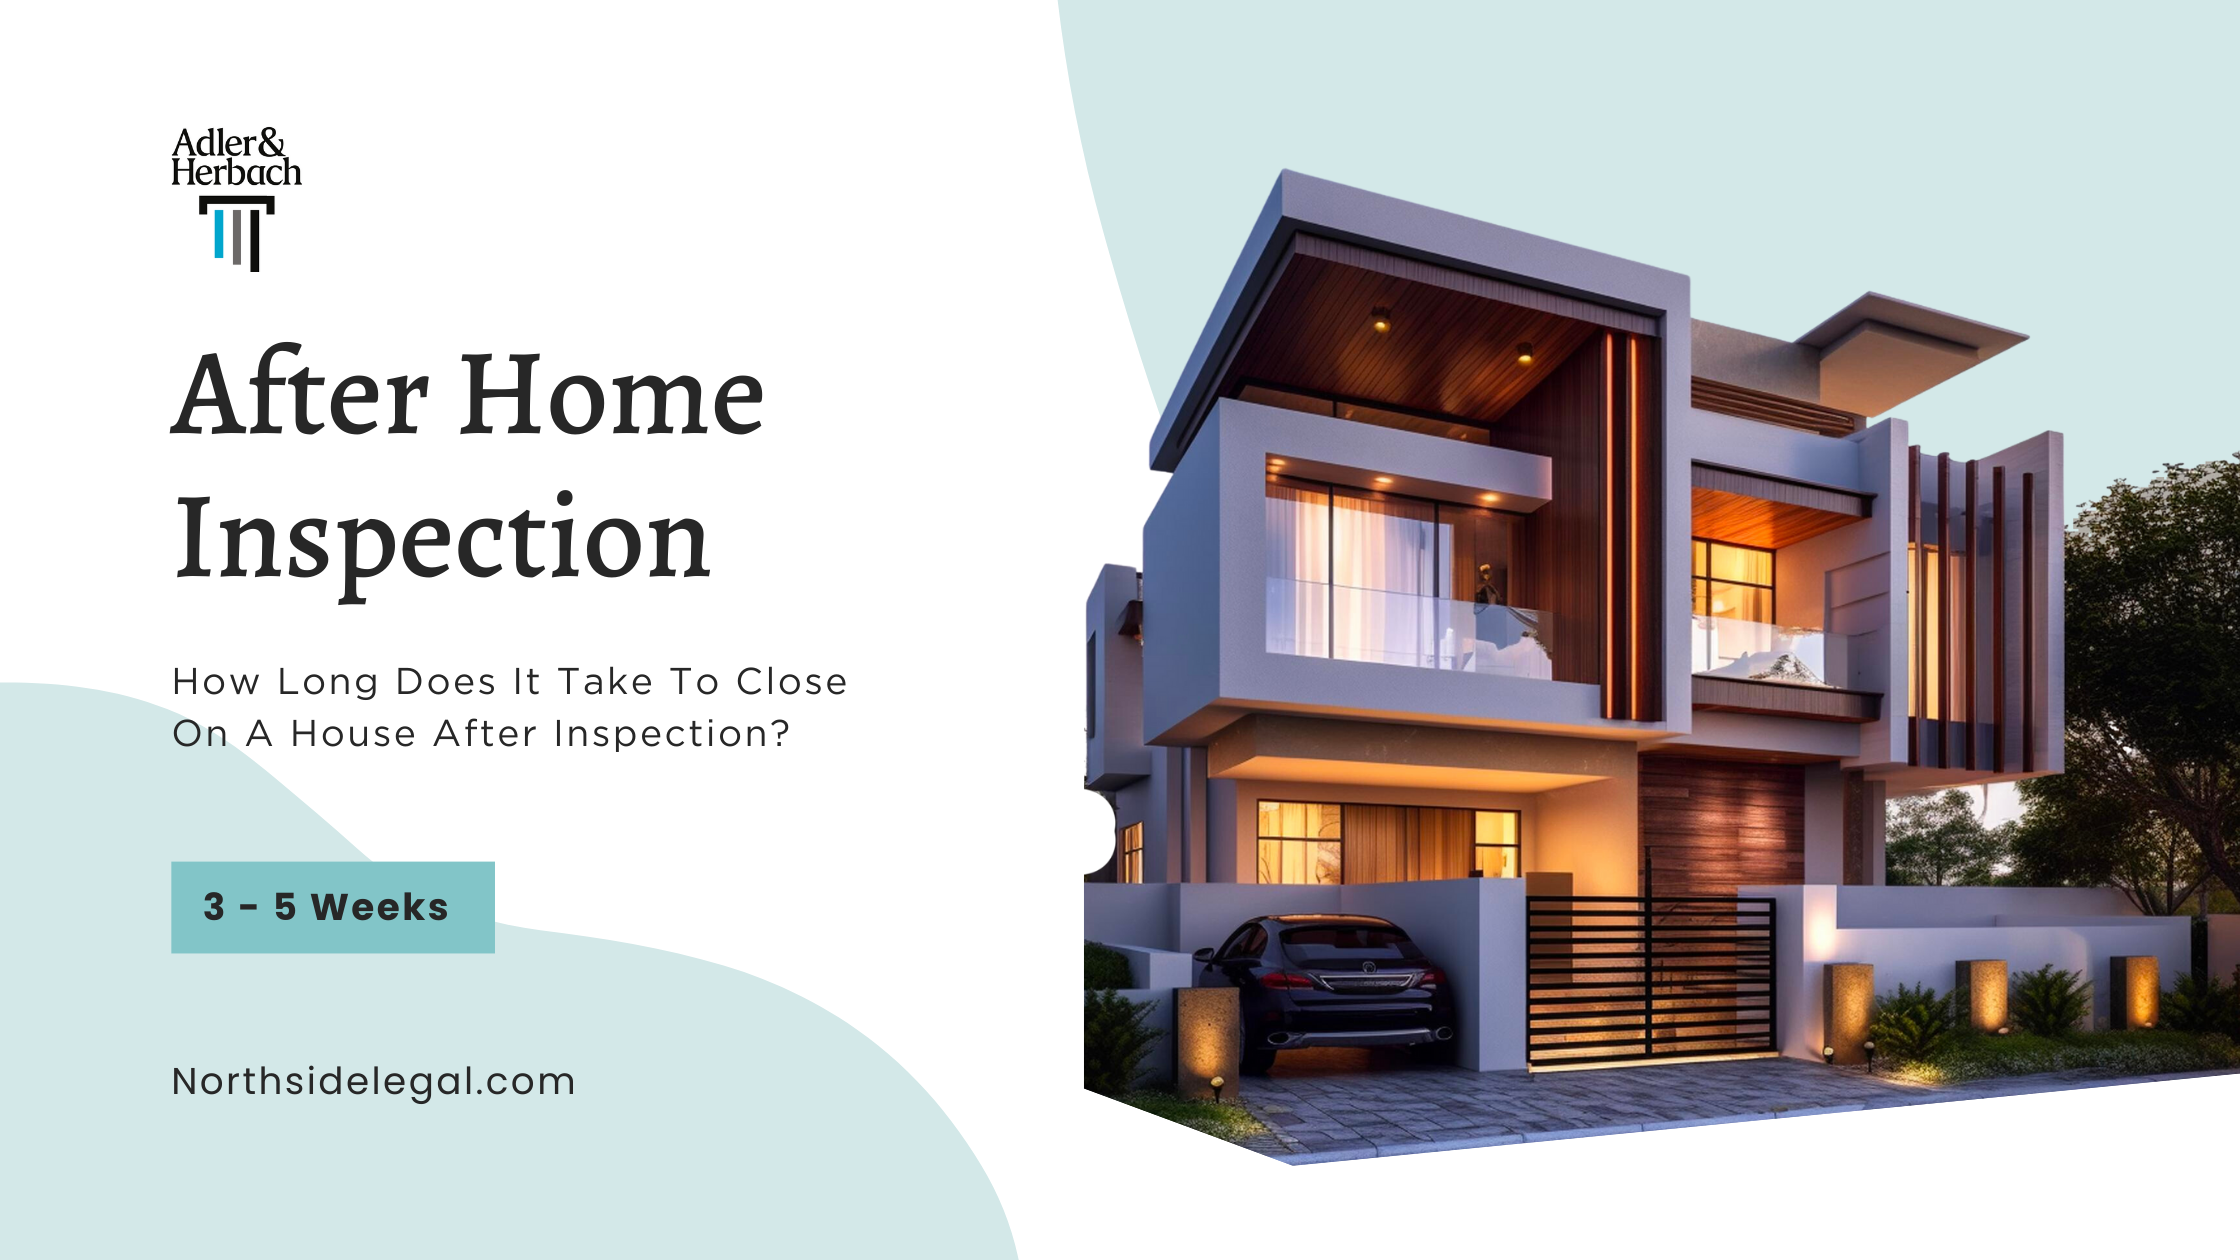 How Long Does It Take To Close On A House After Inspection in Chicago?